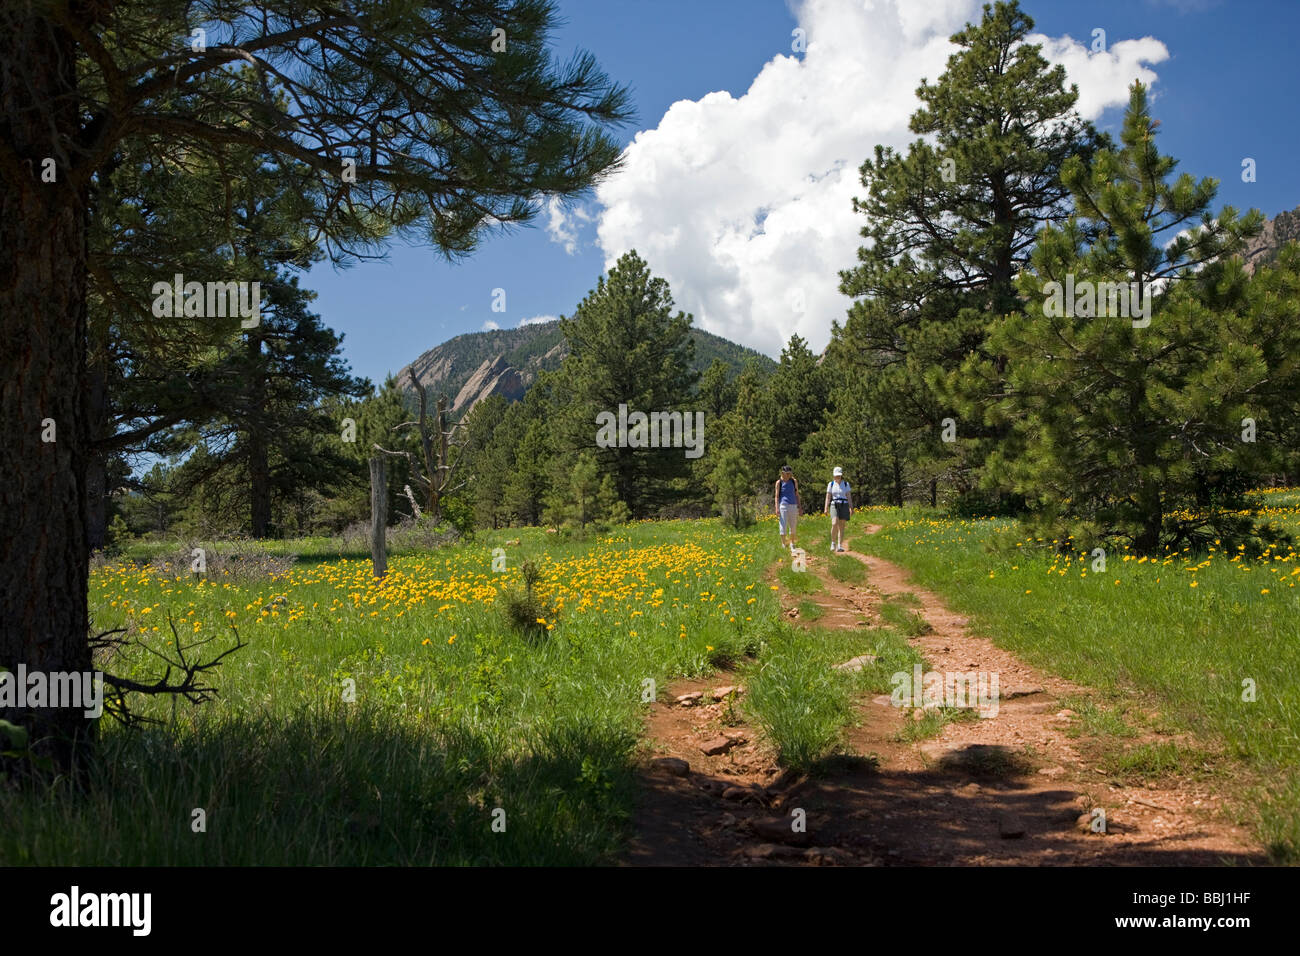 Two female visitors hike the trails among the Arrowleaf Balsamwood wildflowers in Chautauqua Park Boulder Colorado USA Stock Photo